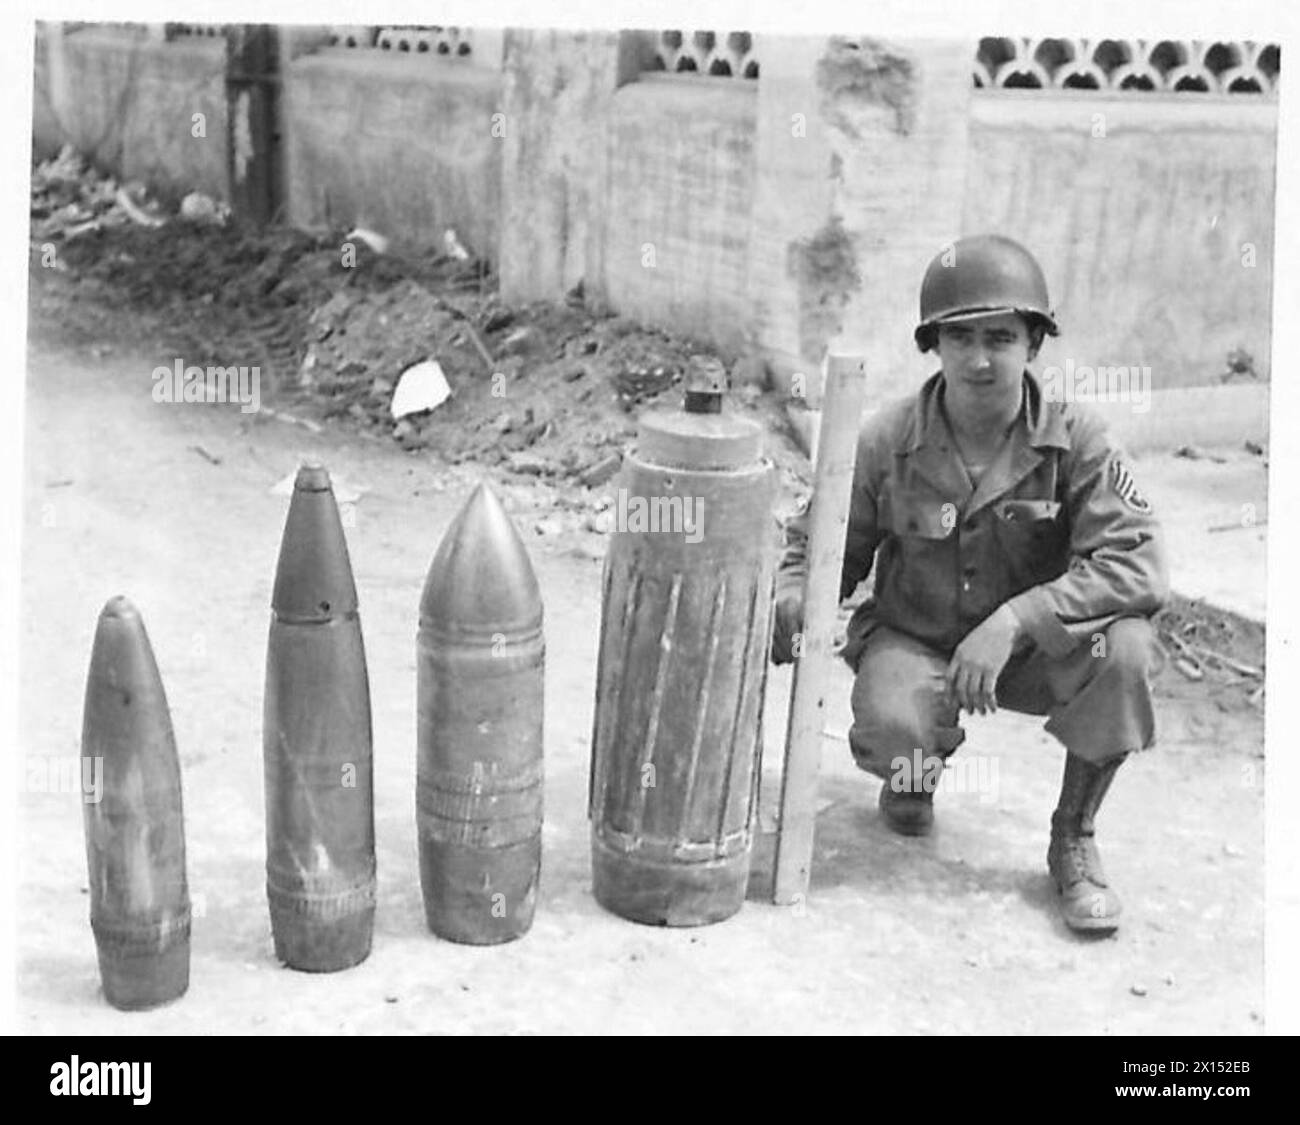 FIFTH ARMY : ANZIO BRIDGEHEAD COMPARISON IN GERMAN SHELLS - Four German shells that have been recovered on the bridgehead. Left to right: - 150 mm - 6 inch 180 mm - 7.2 inch 210 mm - 8.4 inch 280 mm - 11.2 inch 1st Sgt. William A. Hill of Charlestown, S.C., U.S.A. holds up a stick marked off in 6-inch lengths to give an idea of the size of the shells. The 280 mm shell has a mose-cap which is estimated to add 24' to its length. Round the body of the shell are raised strips which fit into the rifling of the gun barrel, the gas seal being obtained by a narrow copper band at the base end of the ra Stock Photo